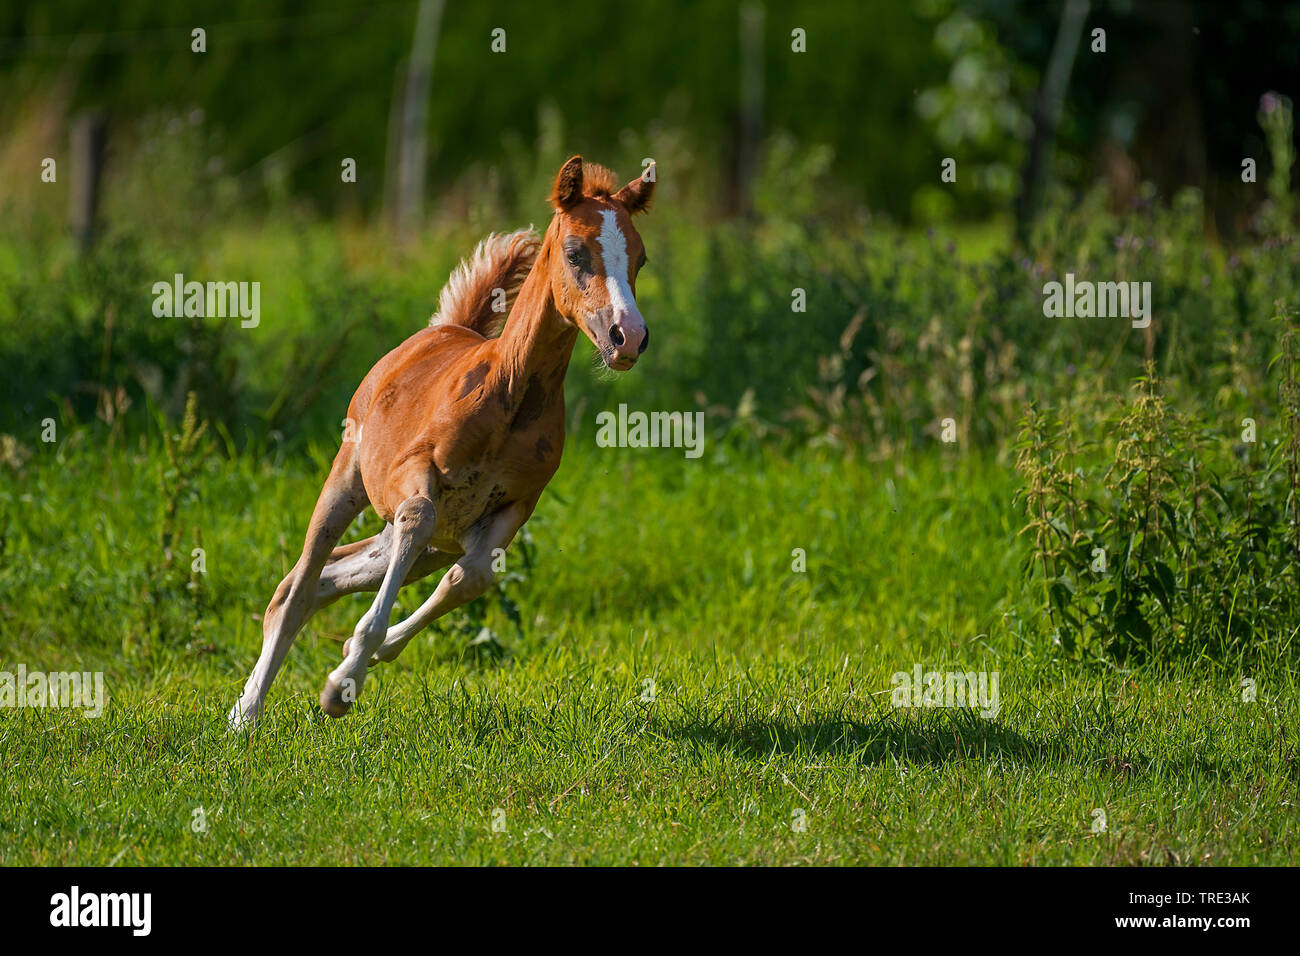 Welsh and cob pony (Equus przewalskii f. caballus), foal galloping in a meadow, front view, Germany, North Rhine-Westphalia Stock Photo